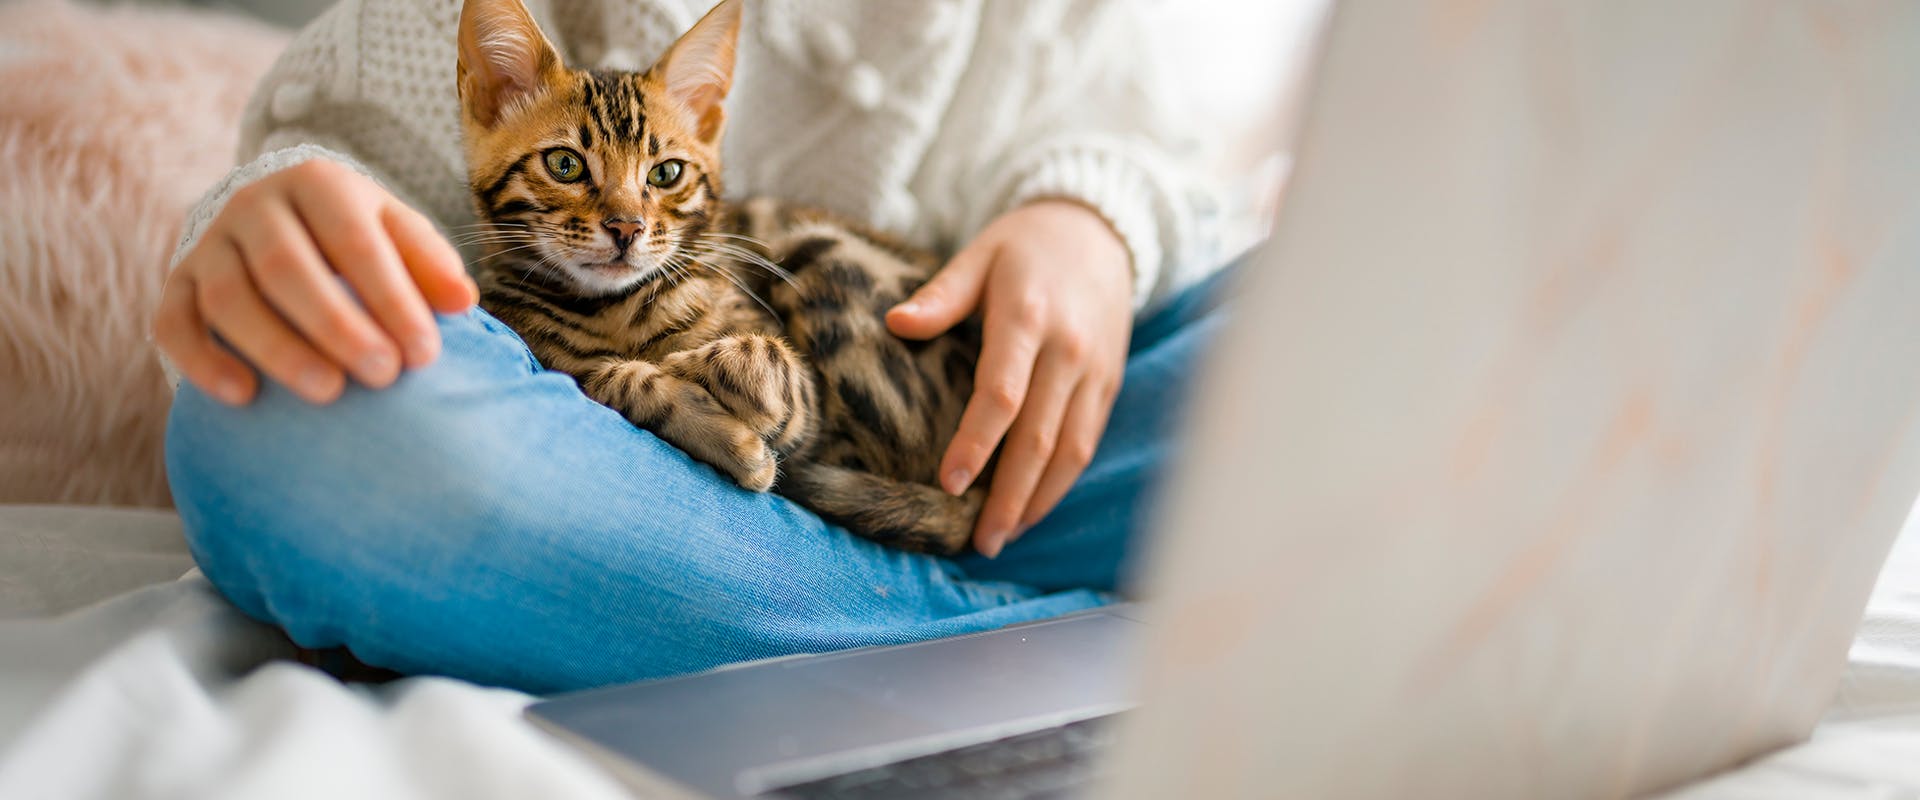 A young cat sitting on their owner's lap, looking at an open laptop screen